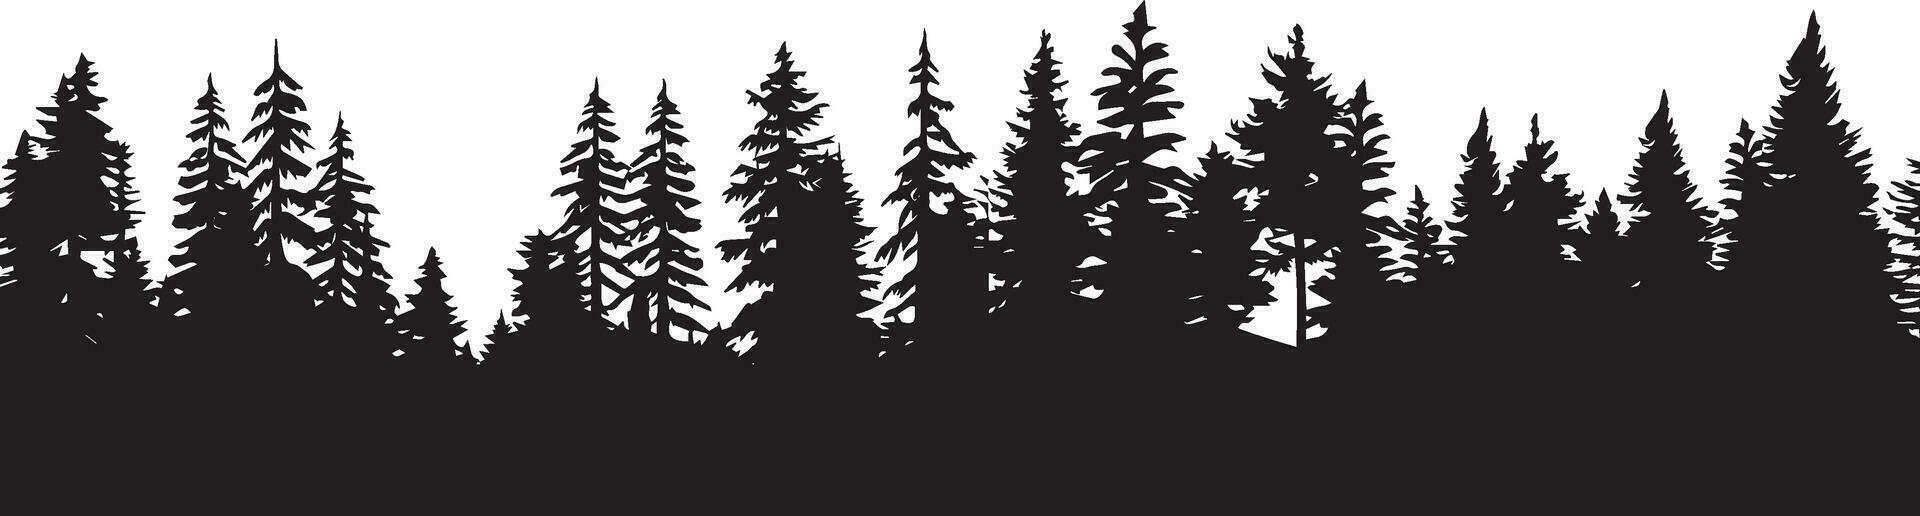 Forest Vector silhouette illustration 15